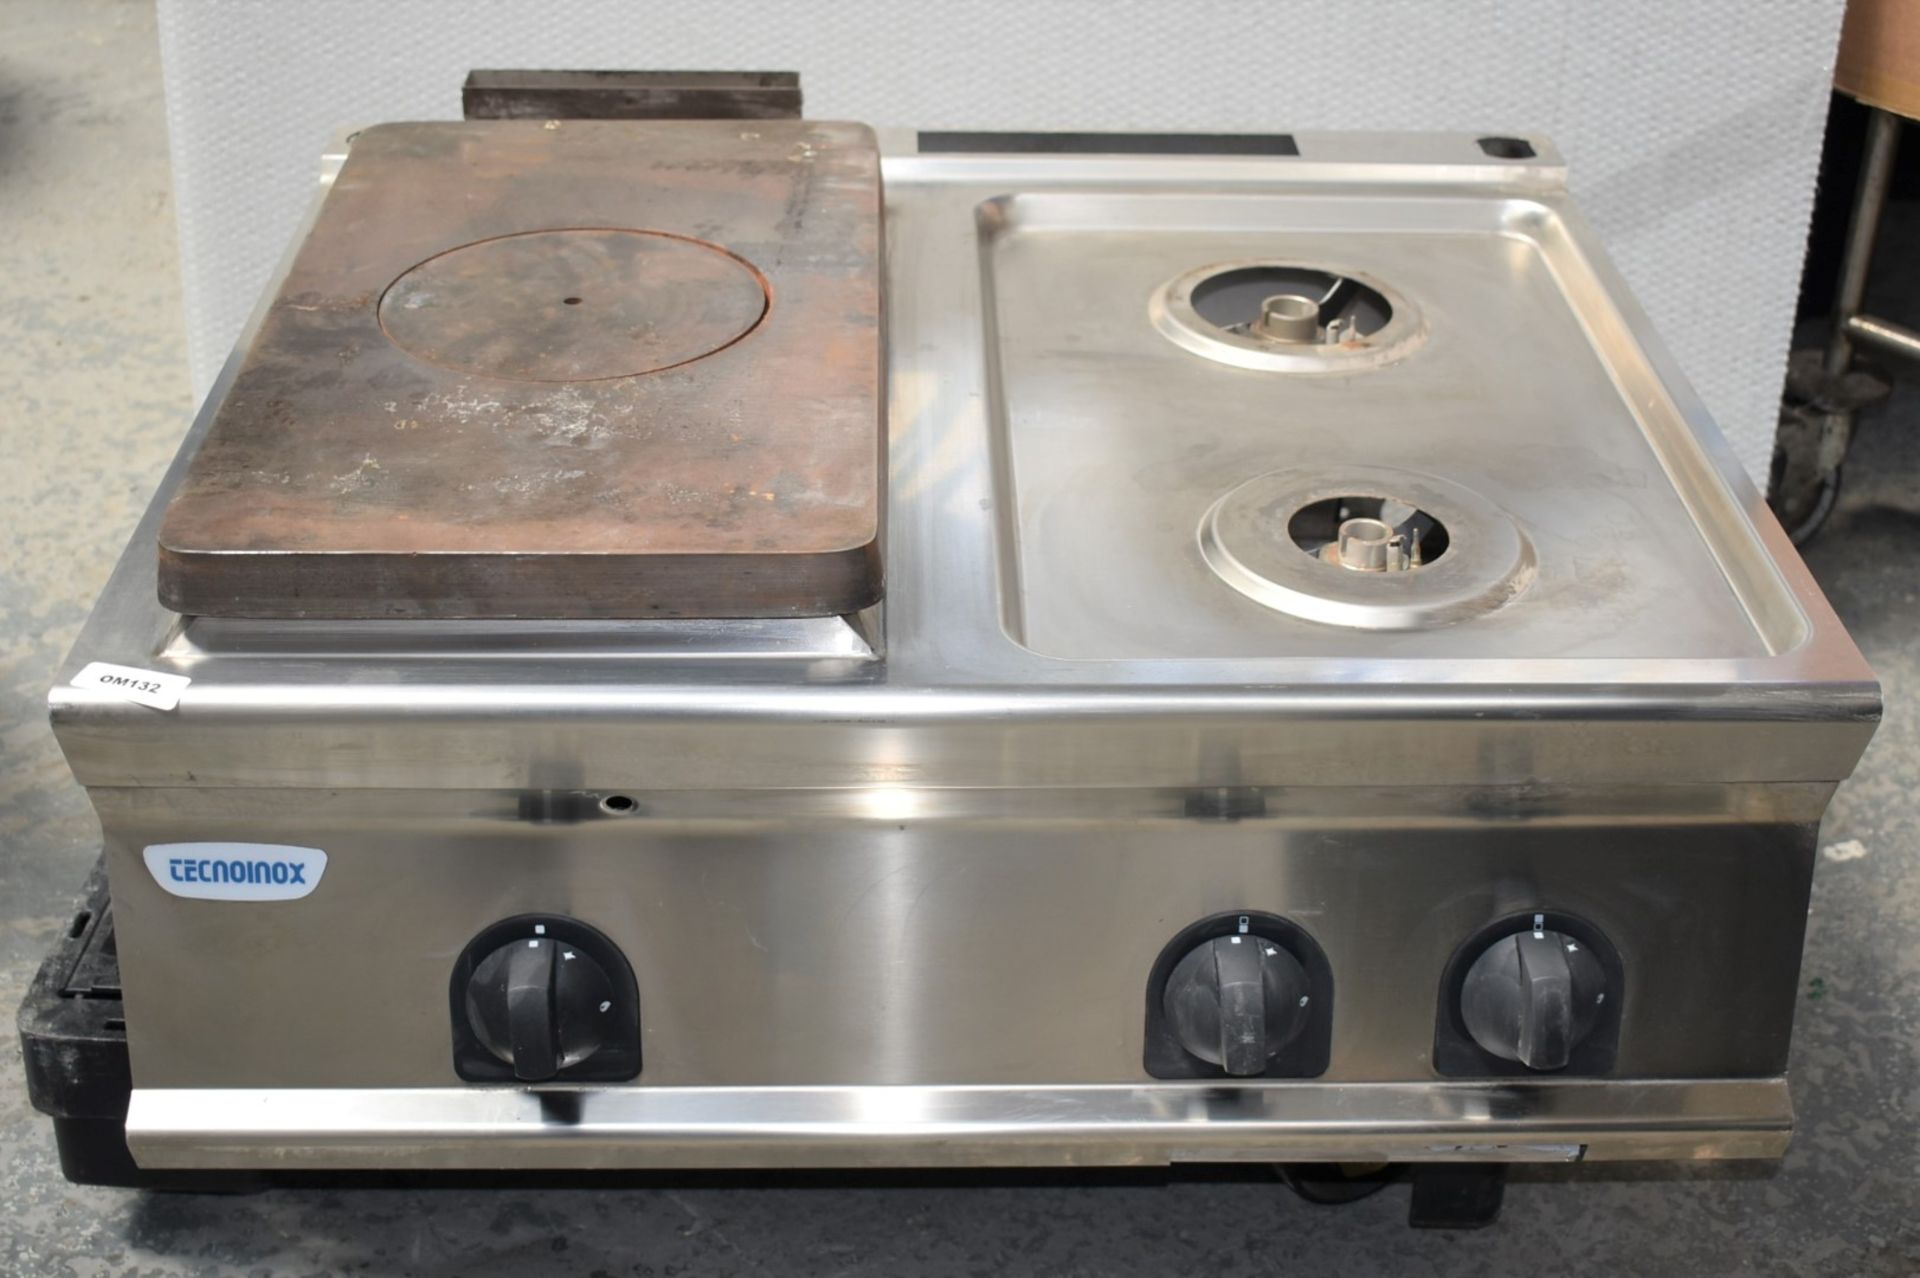 1 x Tecnoinox Cooking Station With Griddle and Two Burner Hob - Model PPC8G7 - RRP £2,225 - Image 6 of 10